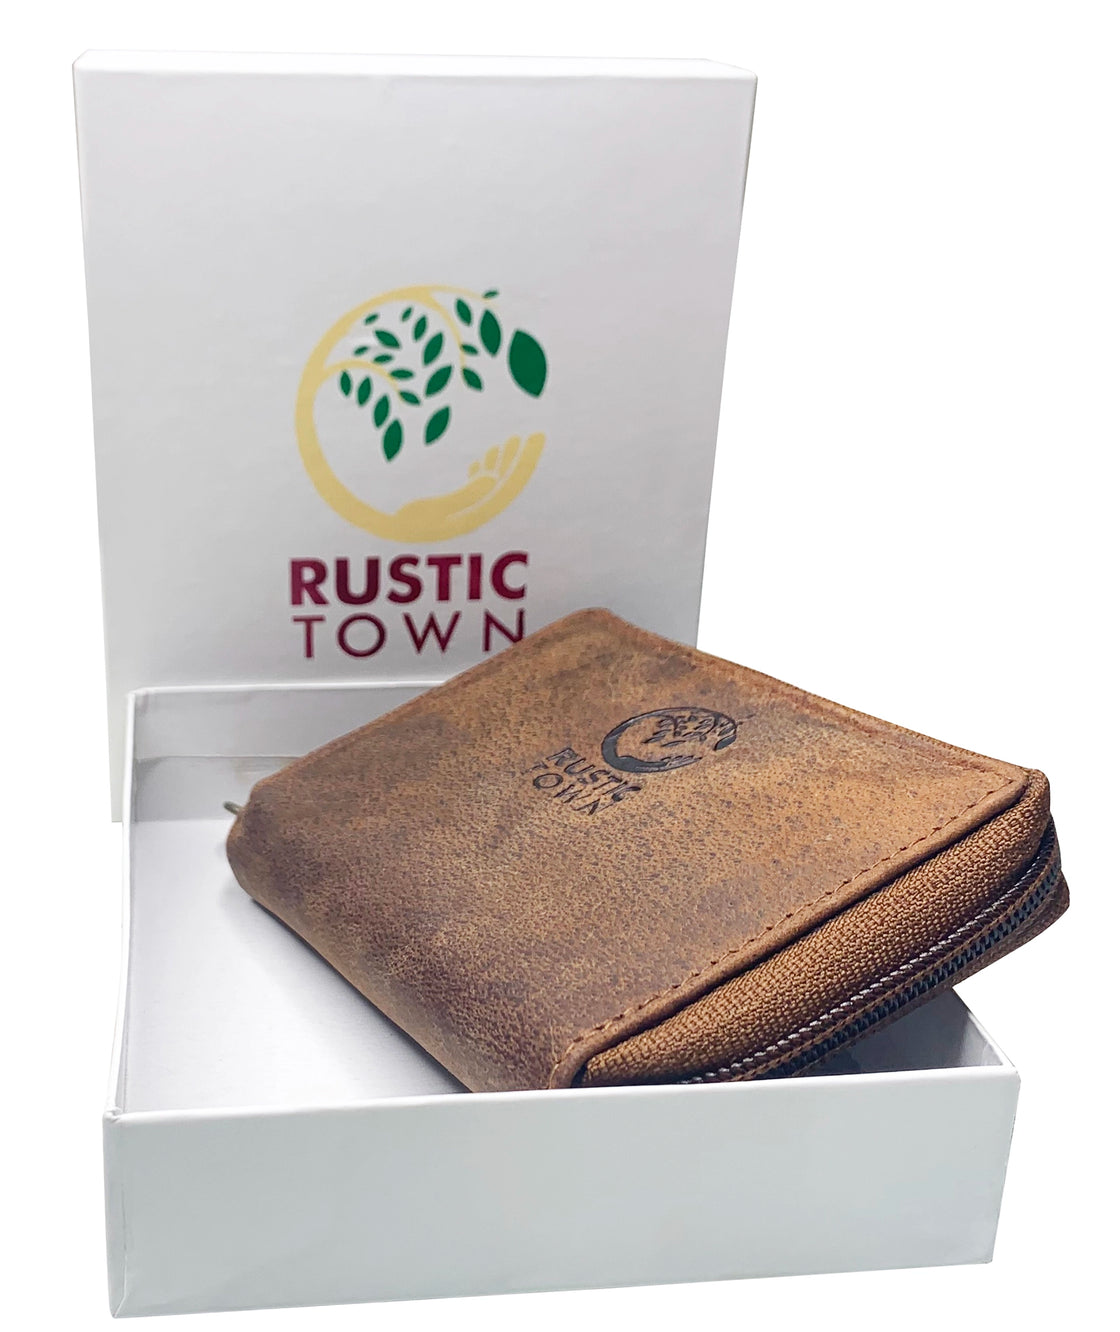 Slim Compact Leather Key Holder Wallet Pouch Gifts Him Her Men Women –  Rustic Town